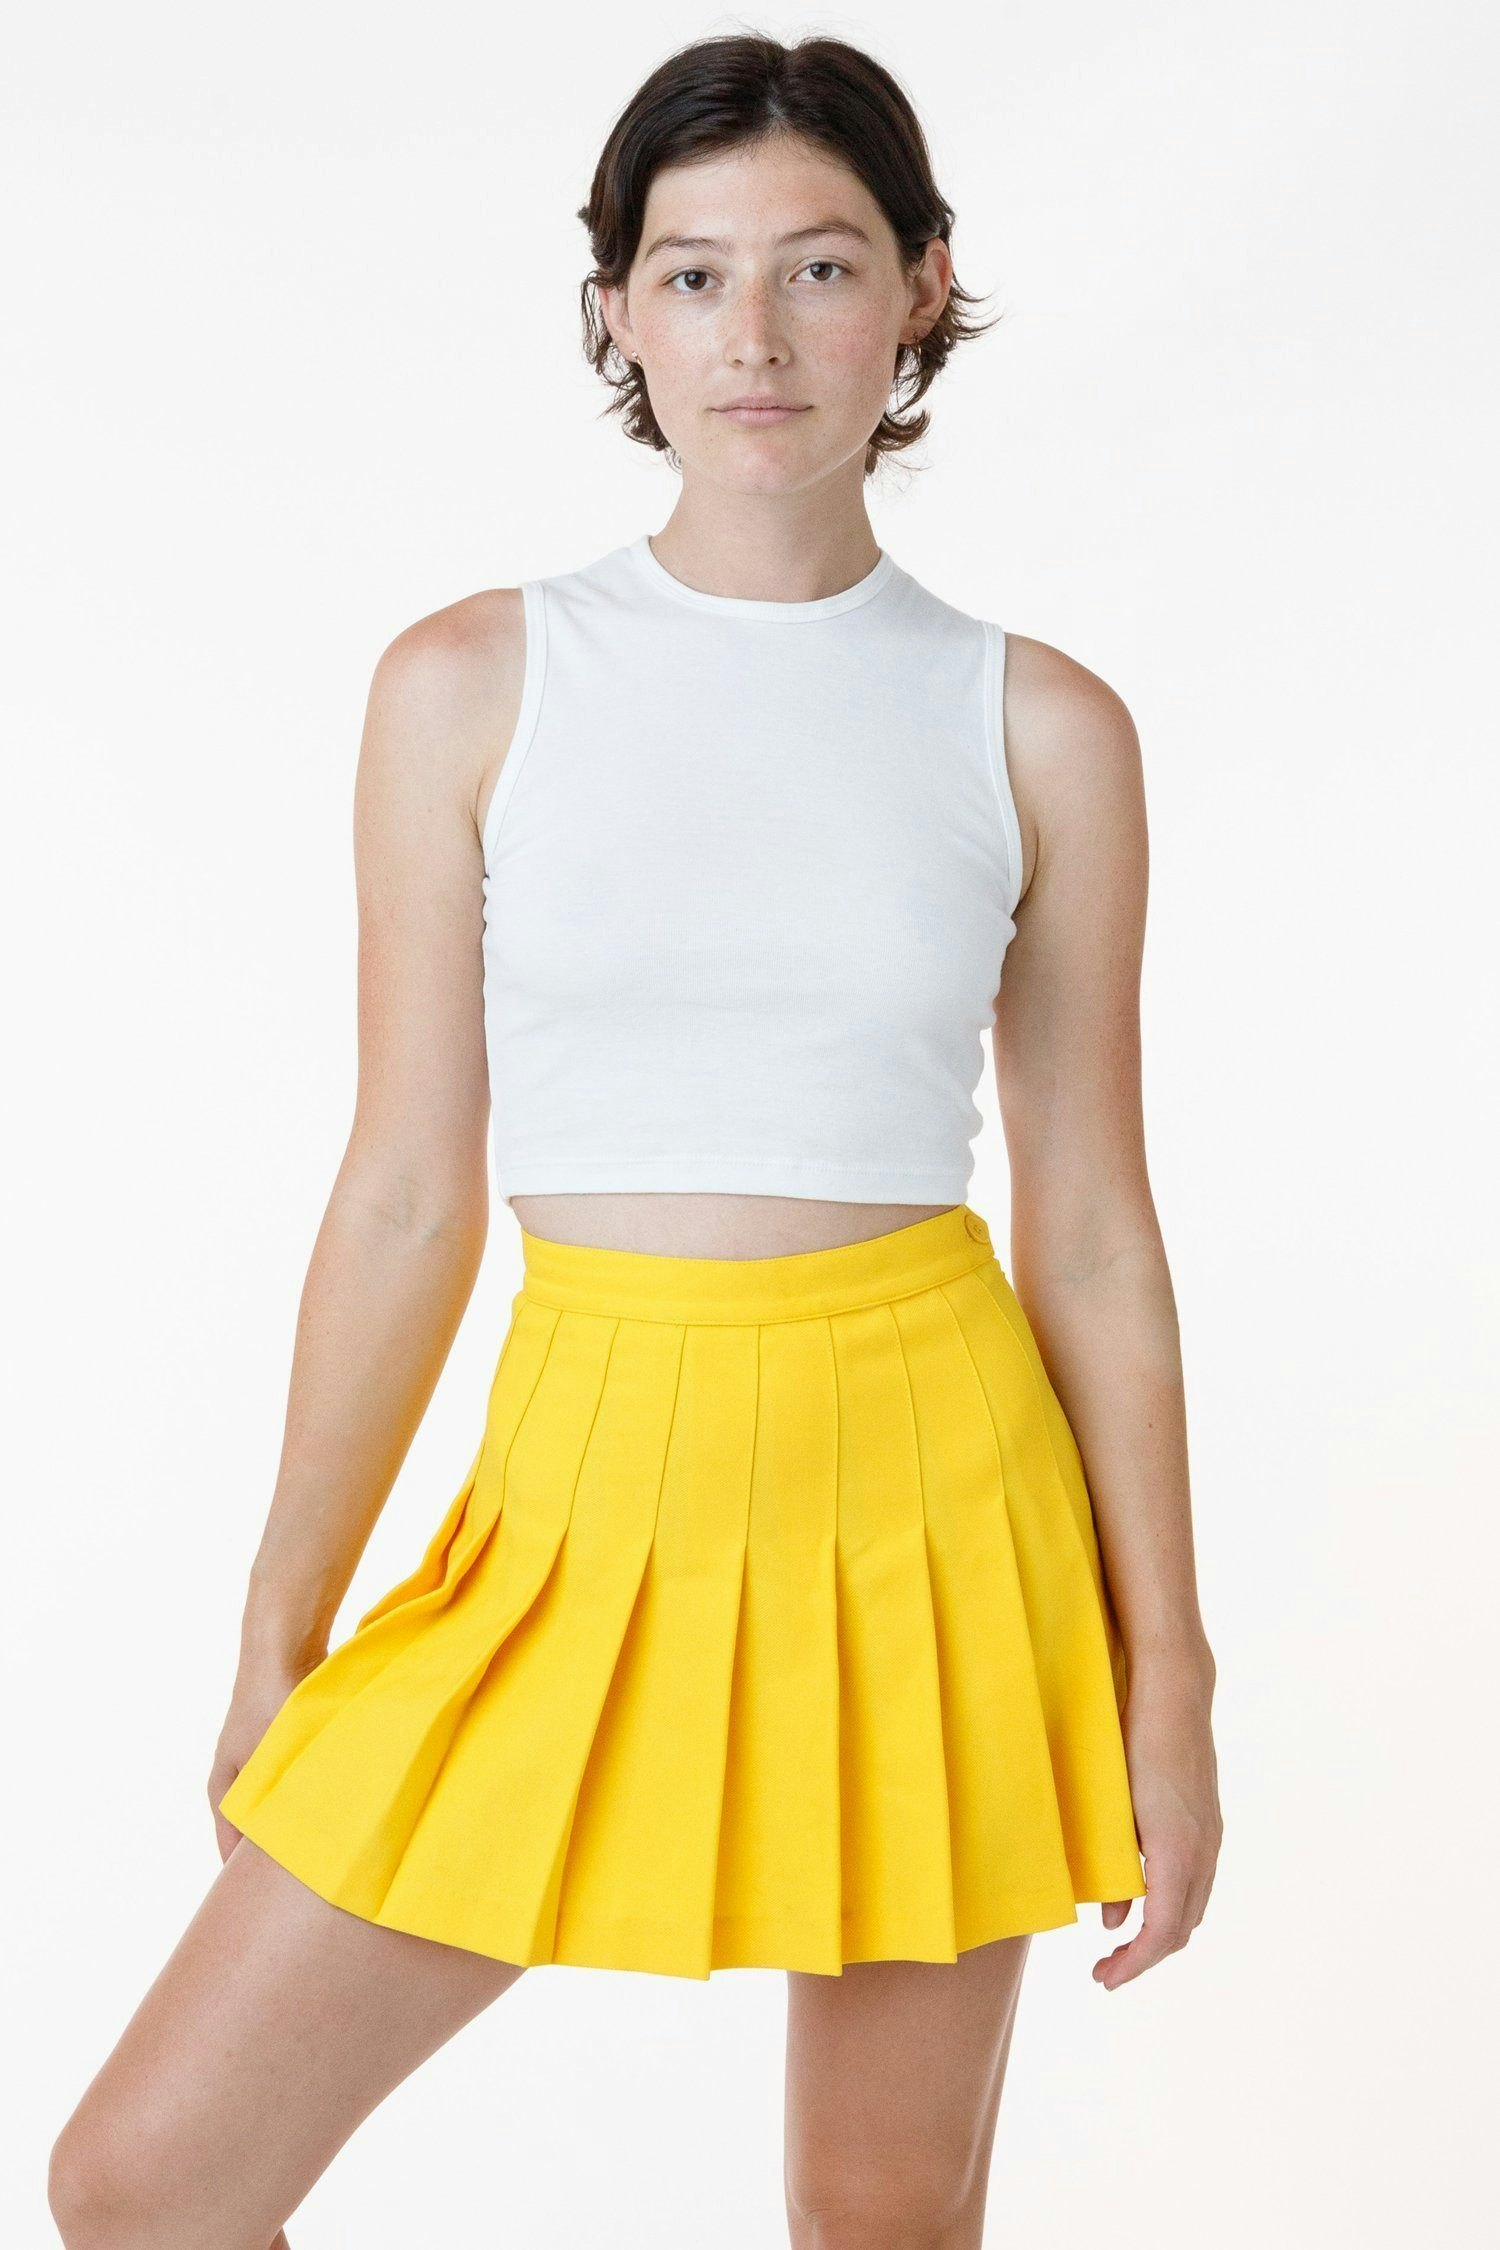 Tennis \u0026 Pleated Mini Skirts For Your 